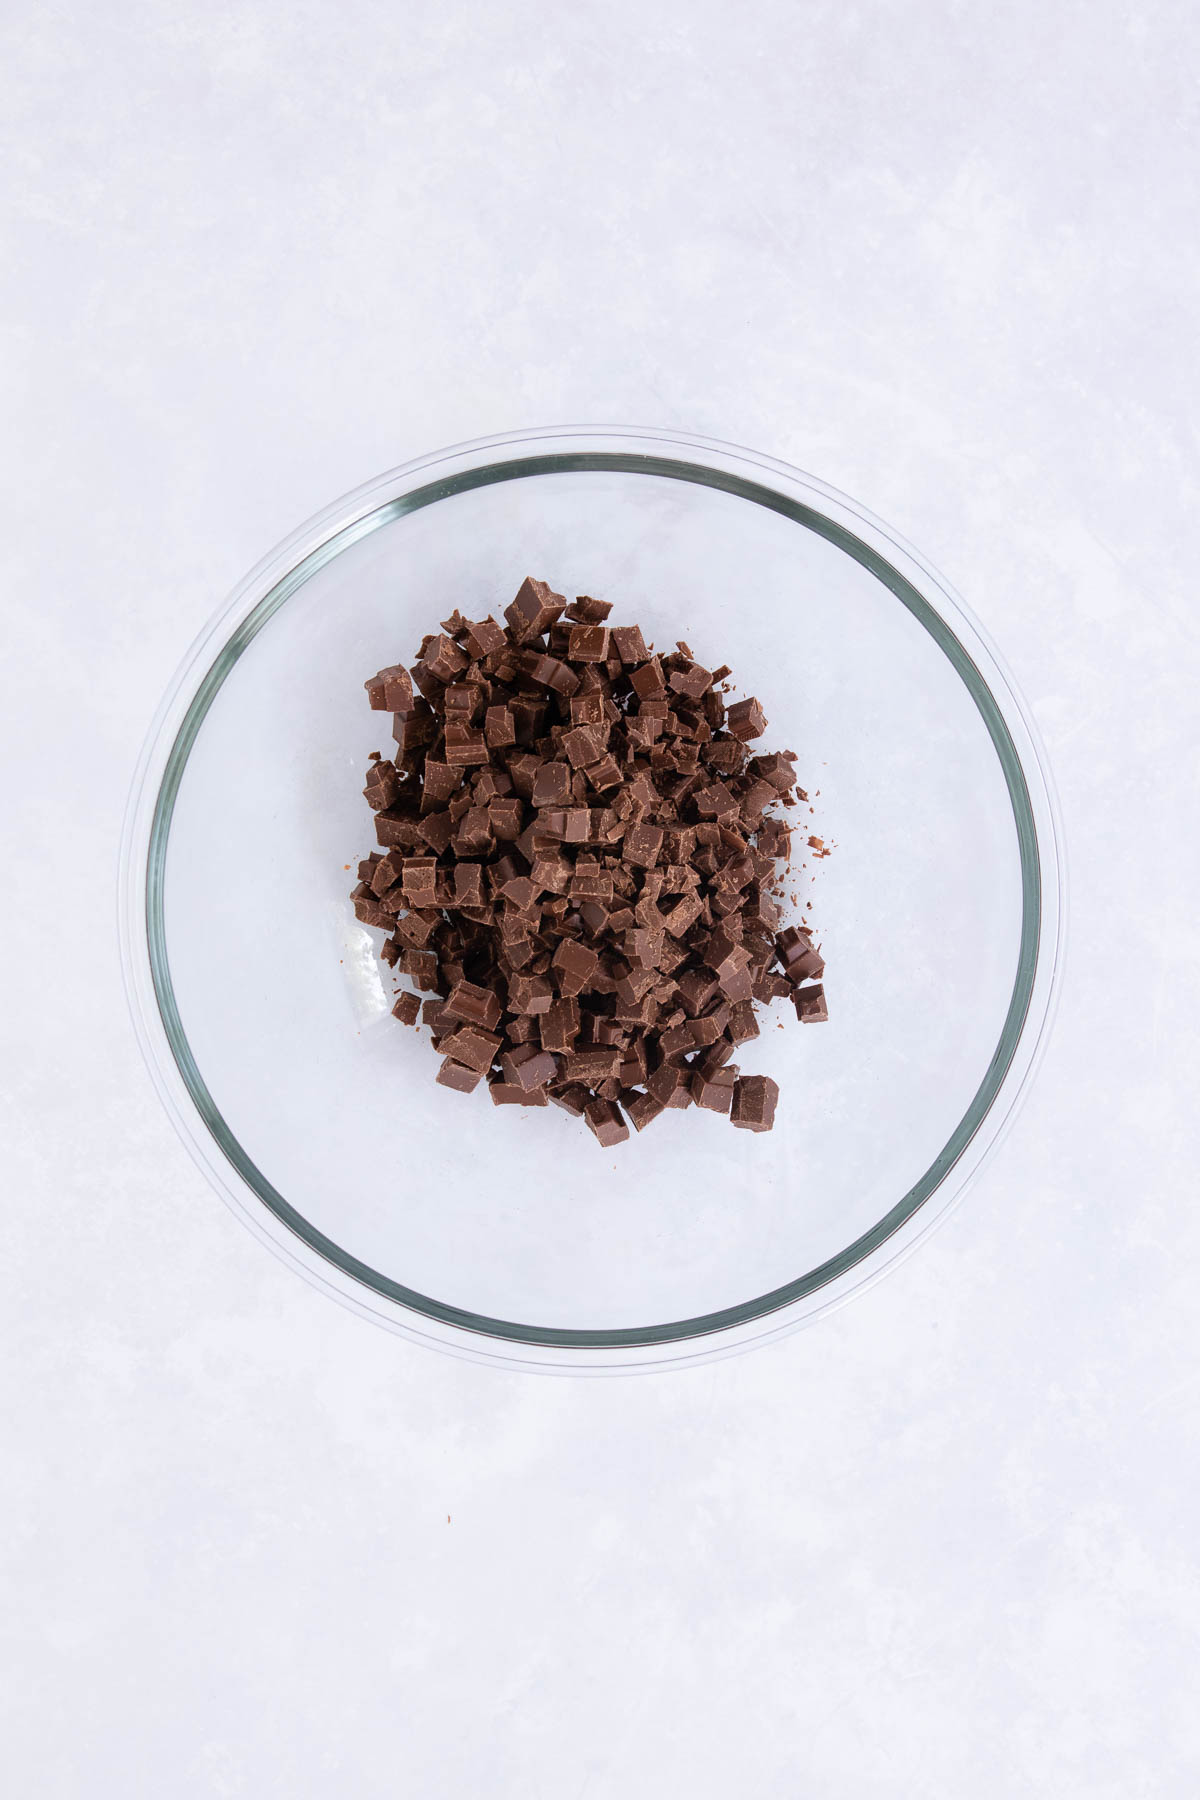 Chopped milk chocolate in a large glass mixing bowl, on a grey marble background.